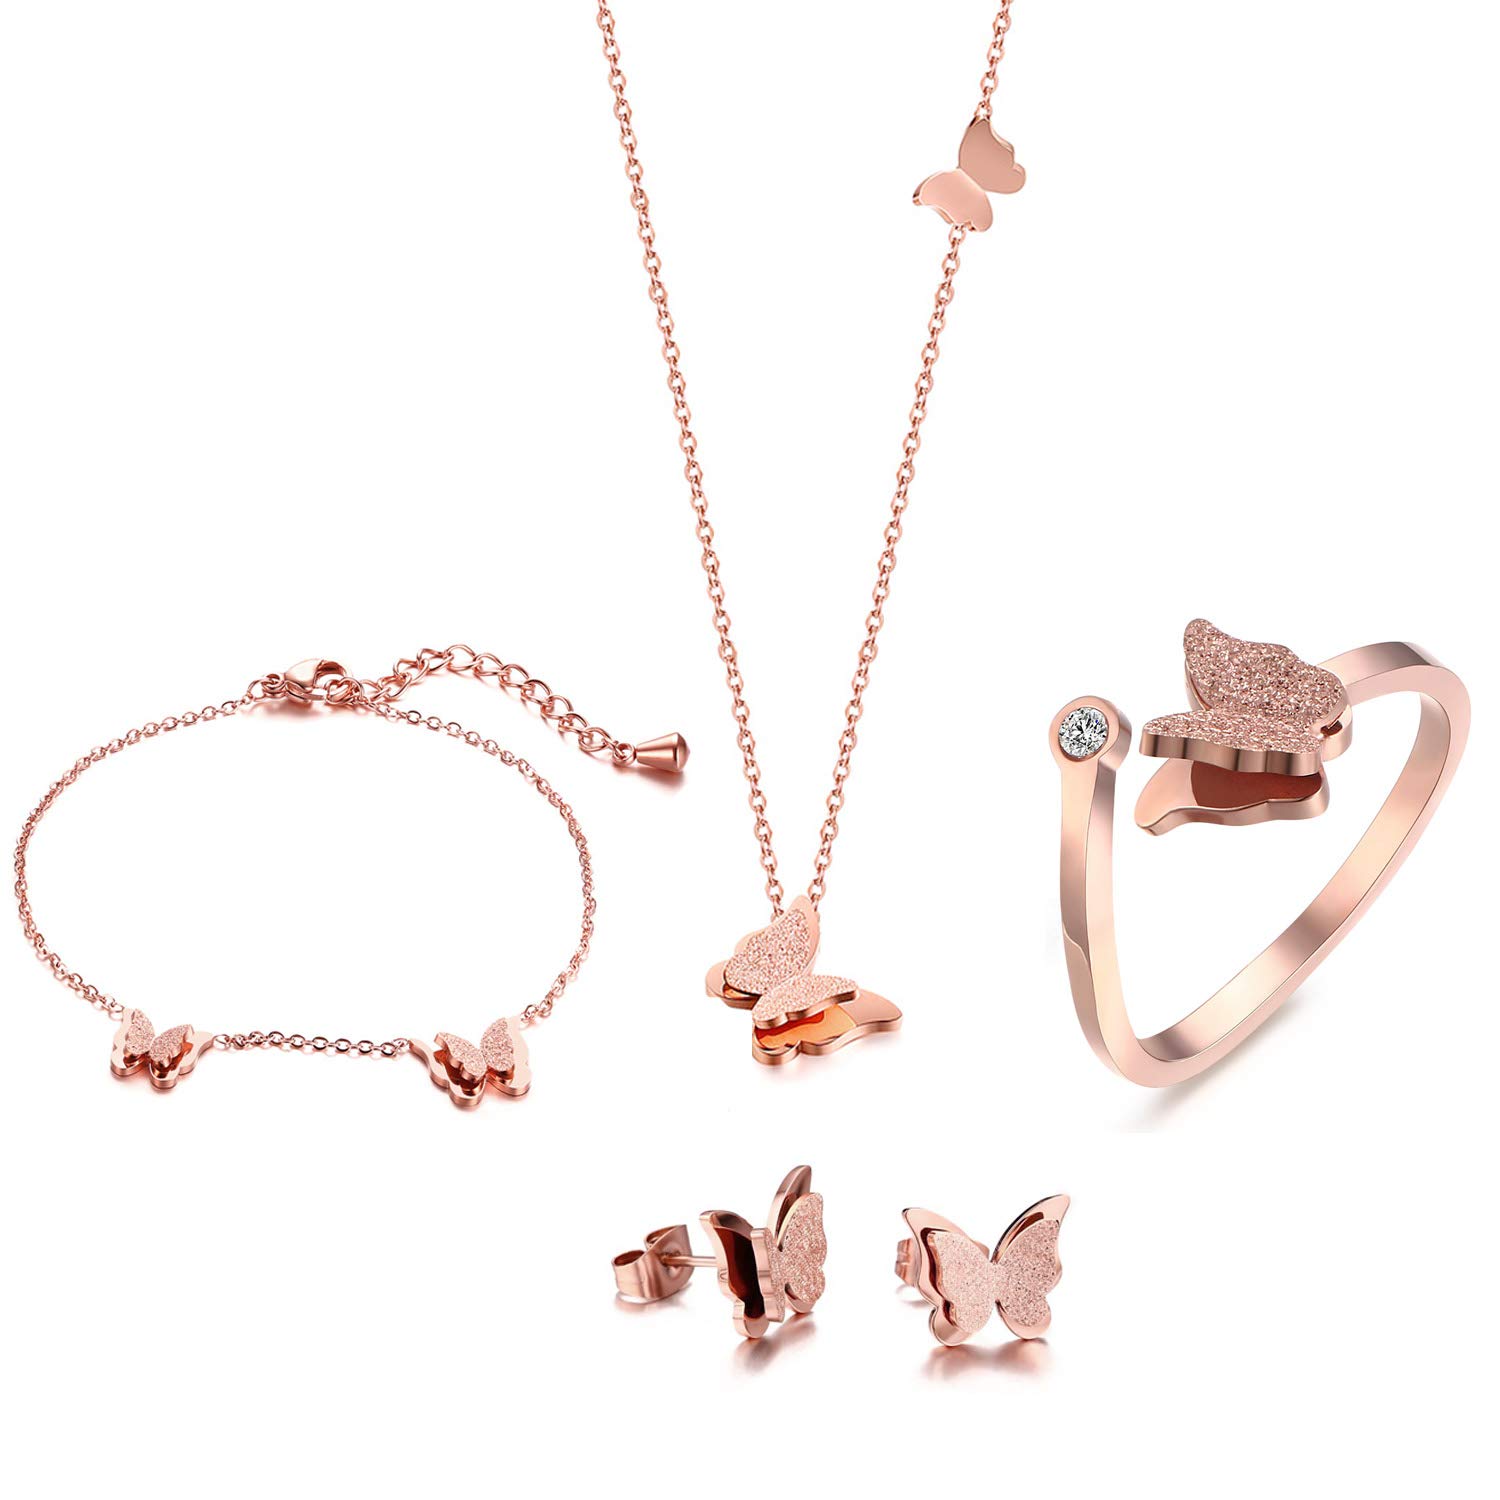 

Womens Stainless Steel Necklace Set Rose Gold Cubic Zirconia Butterfly Matte Finish Adjustable Cuff Engagement Ring/Neckalce/Bracelet/Earrings,Jewelry Set